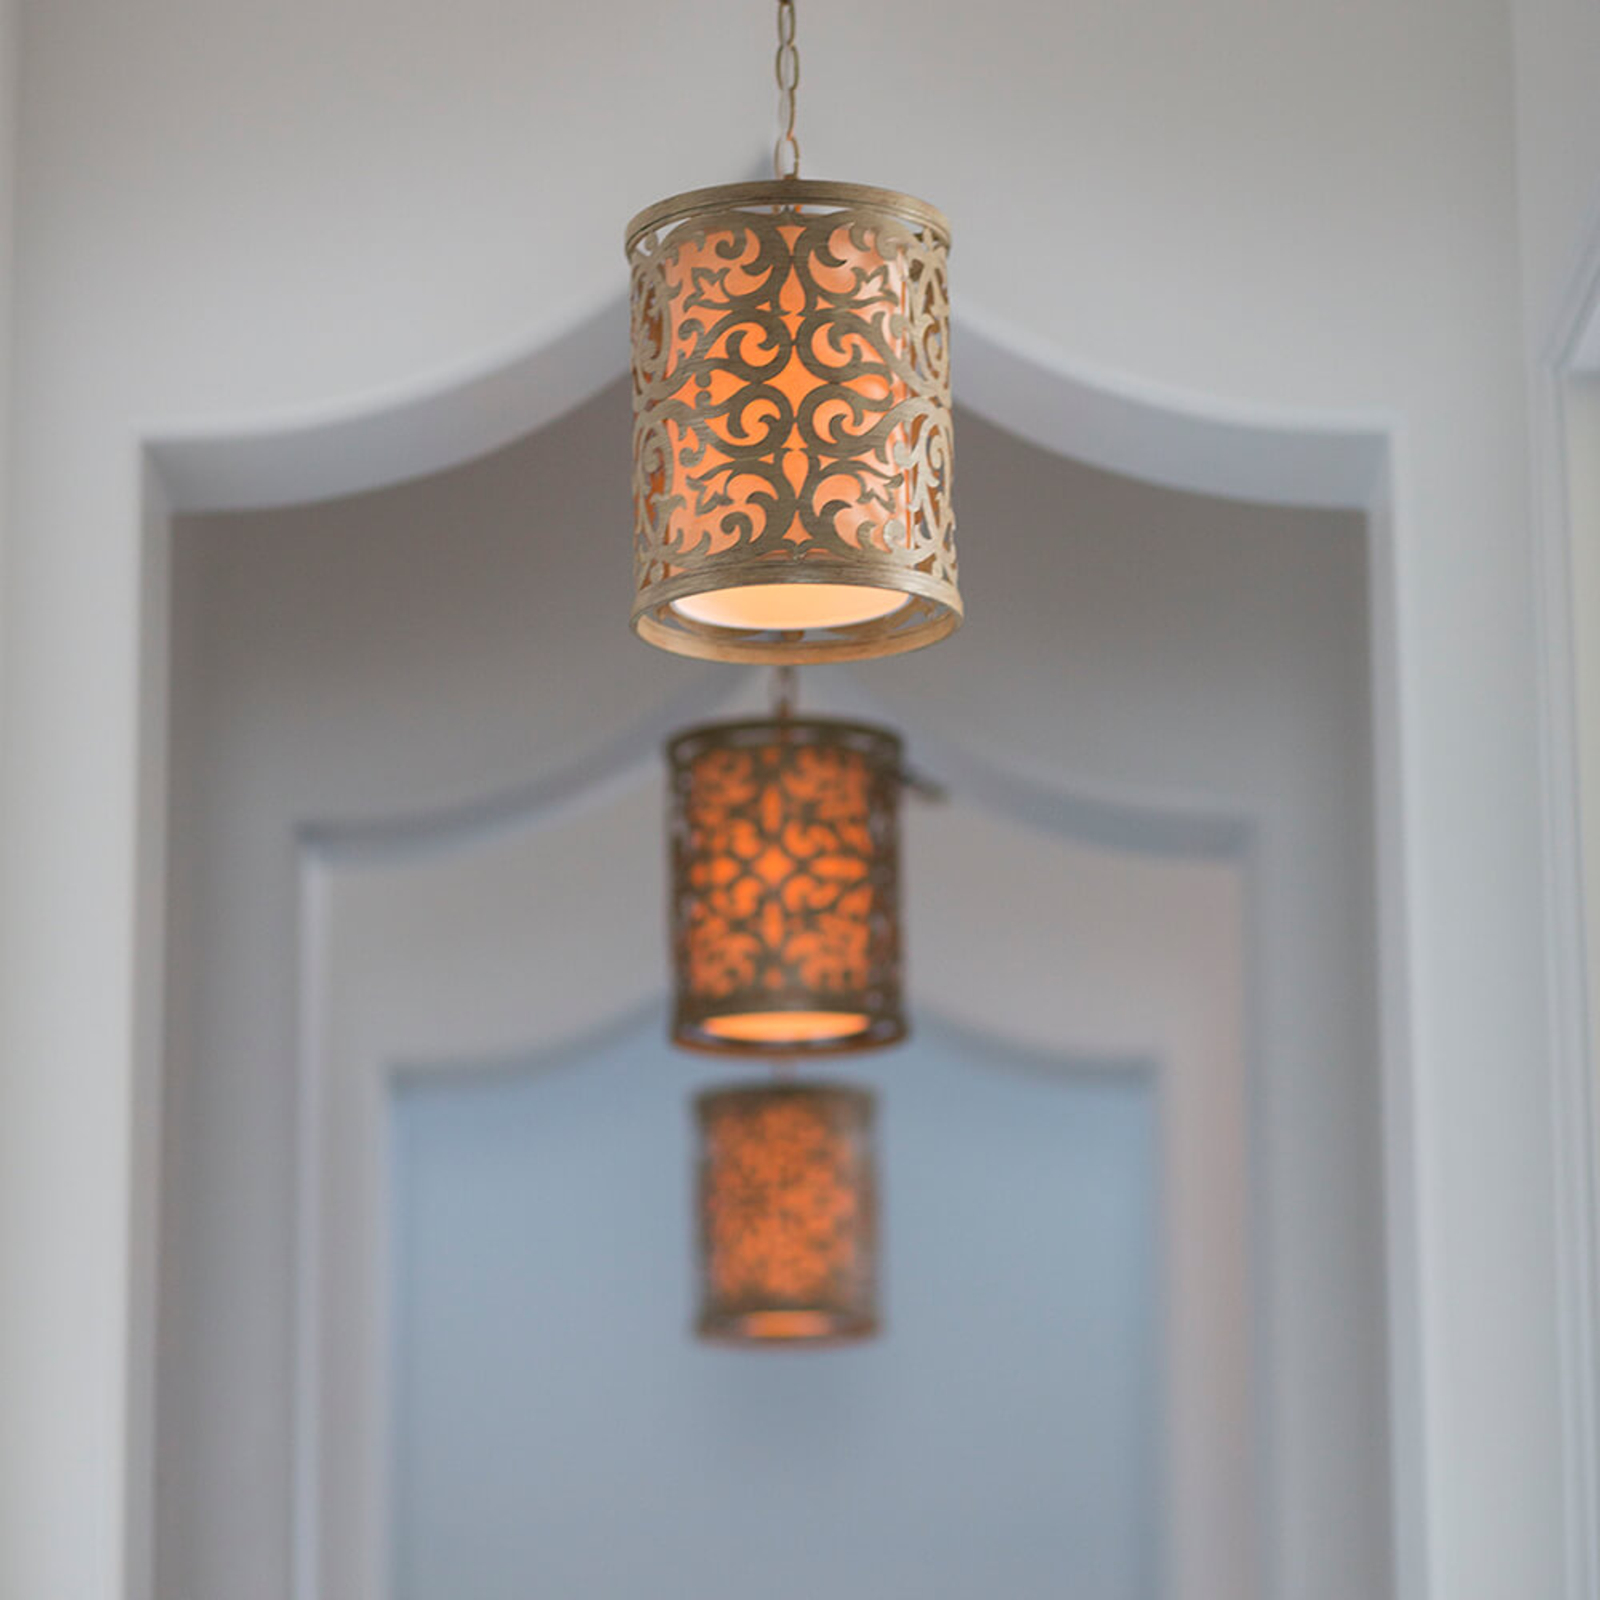 Carabel -hanging light with an antique look